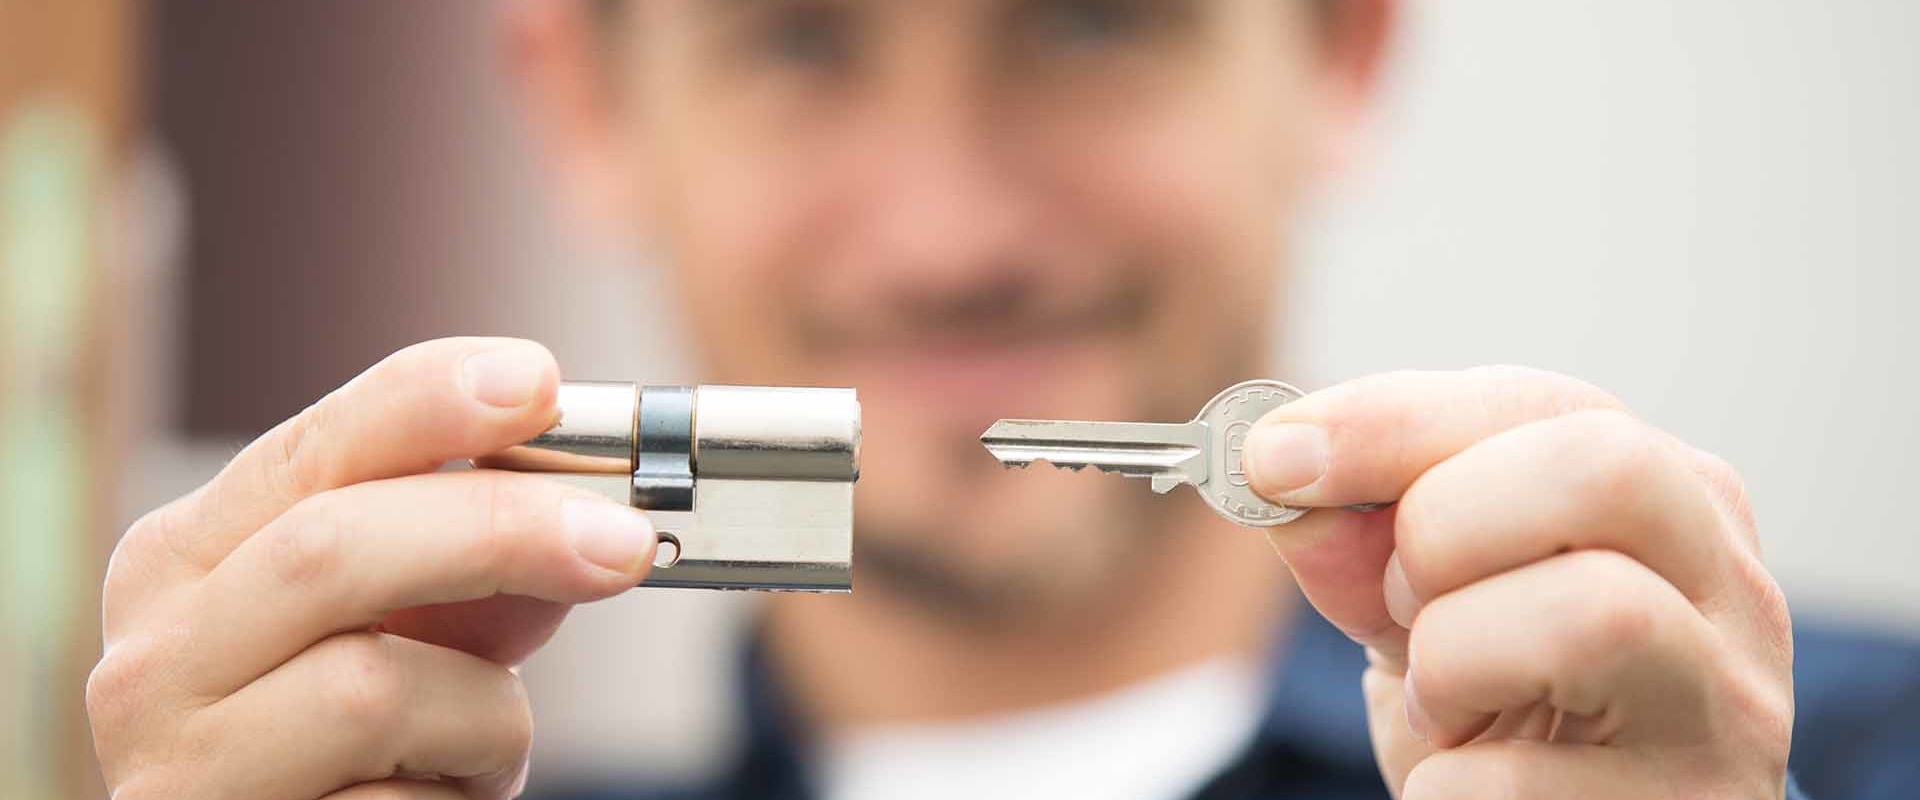 How Does a Locksmith Verify You Live There?